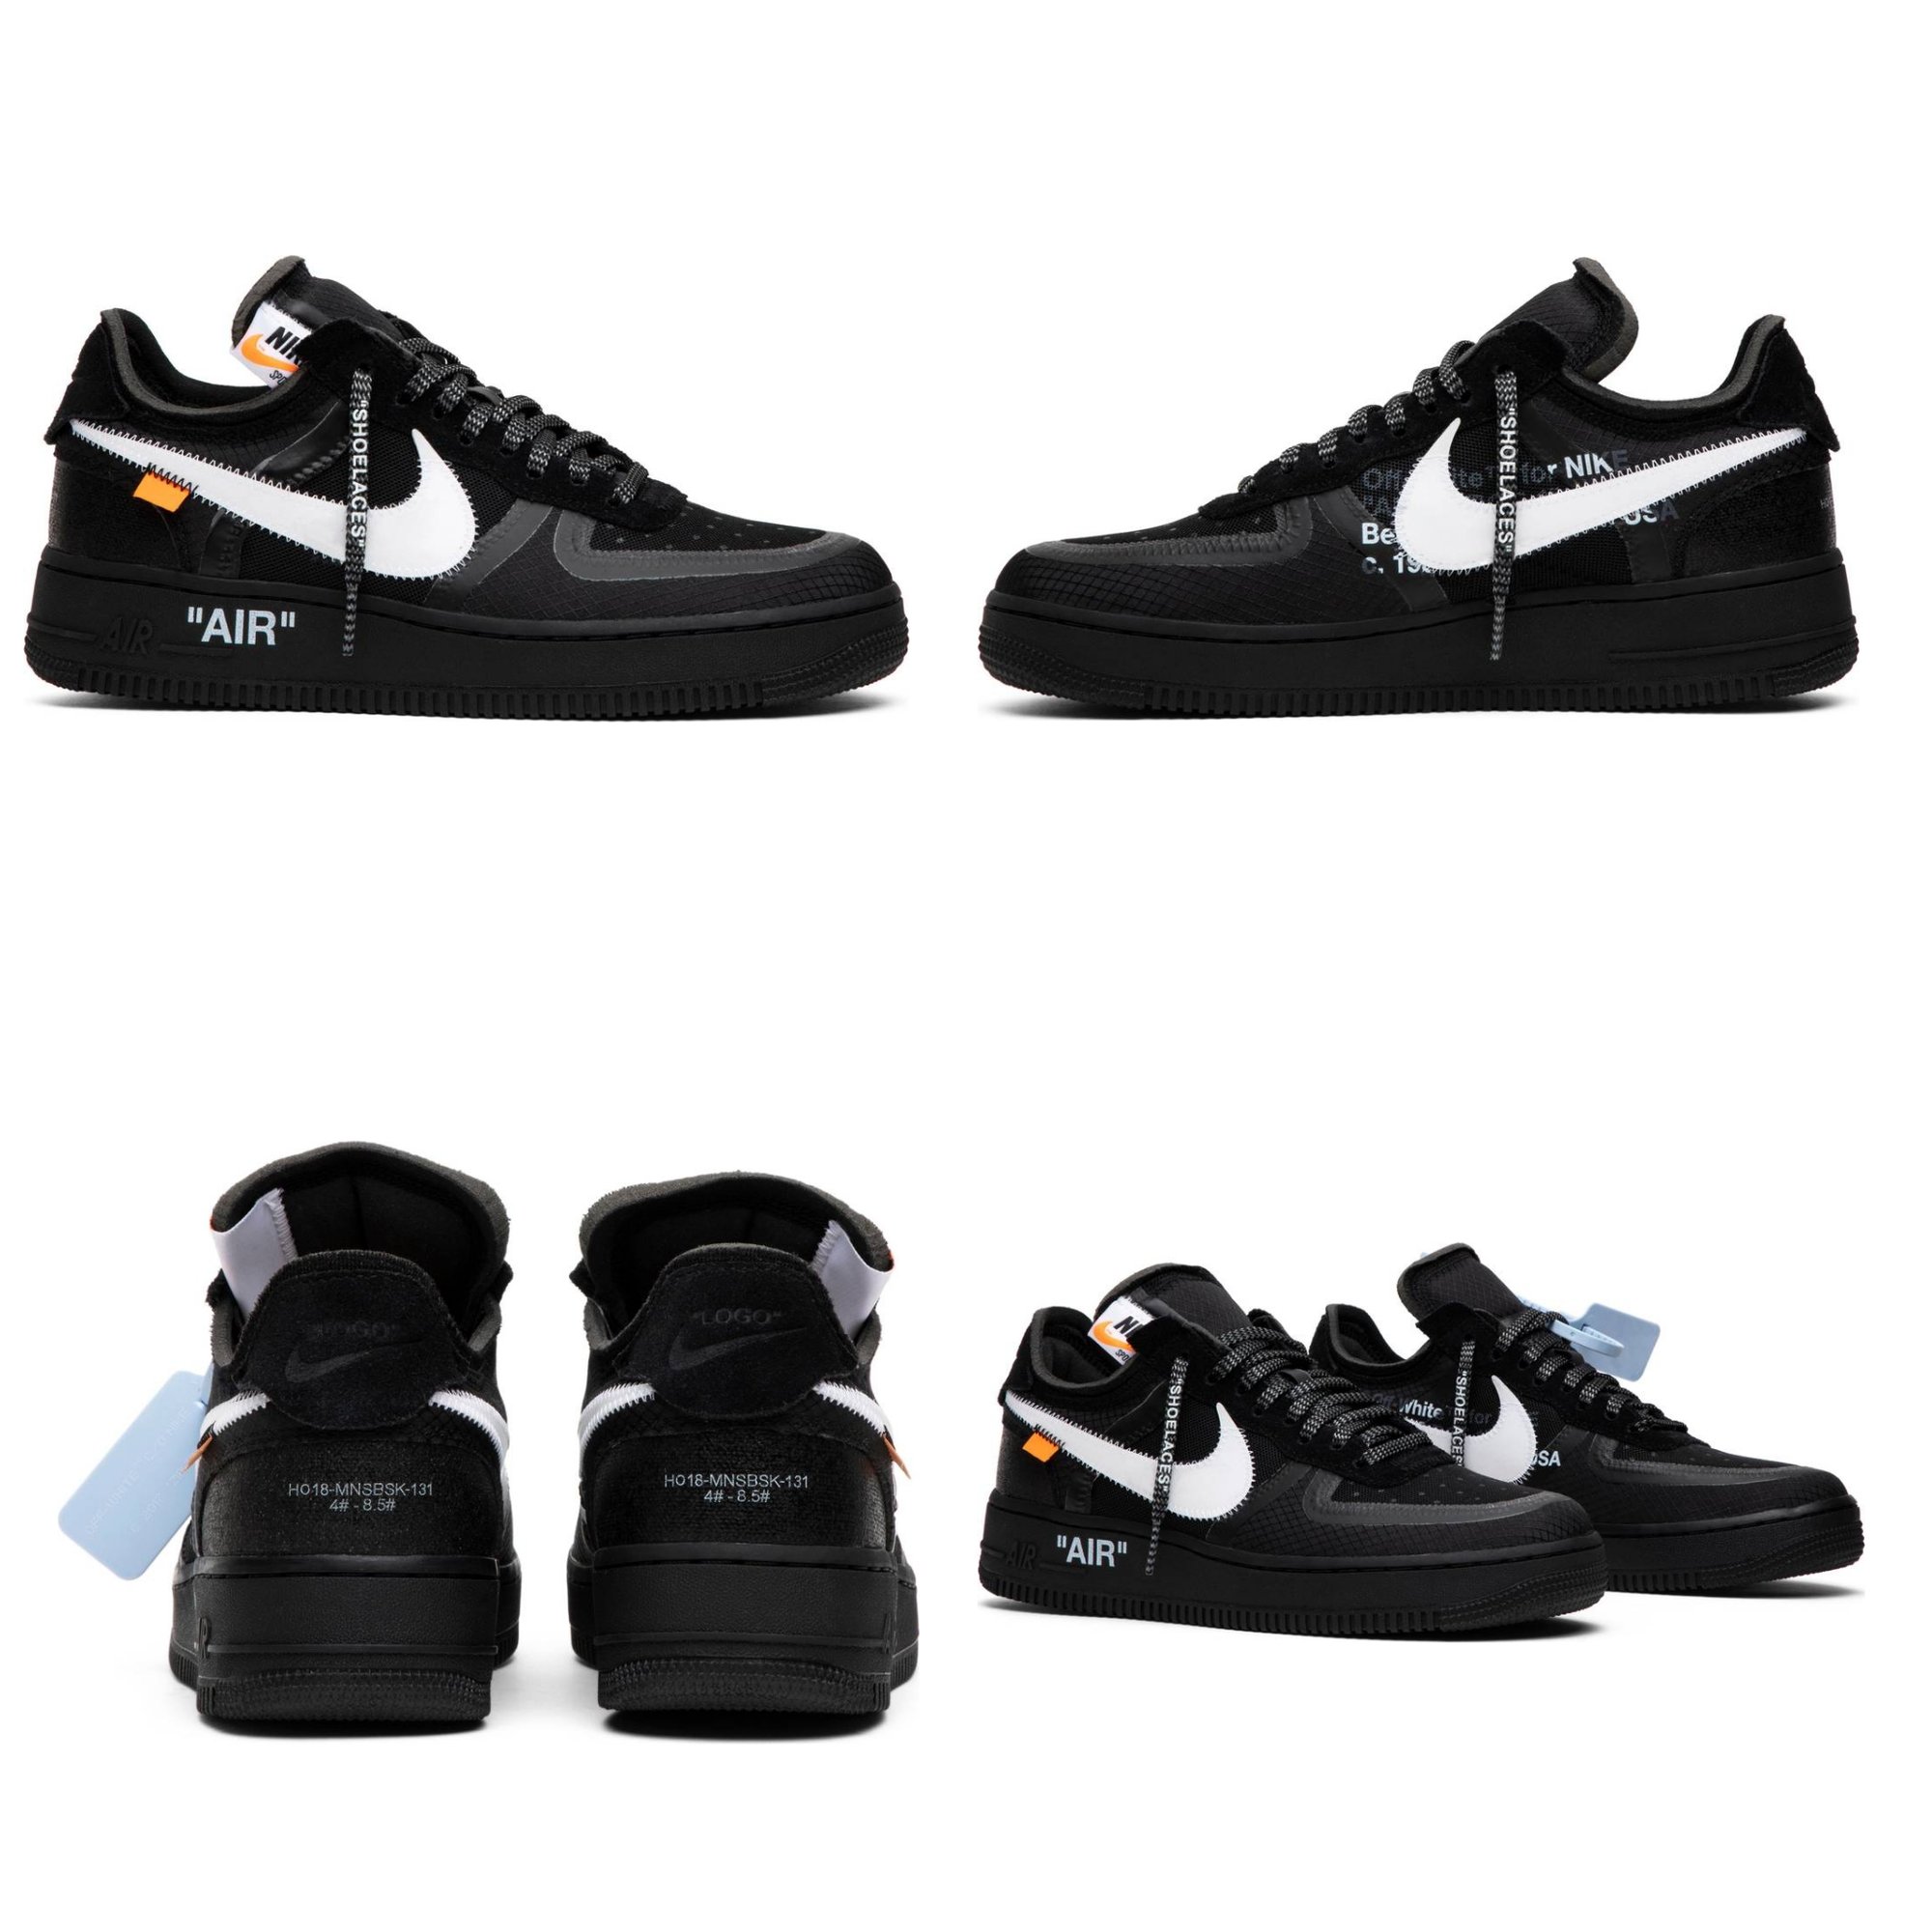 Off-White x Nike Air Force 1 Black Release Info